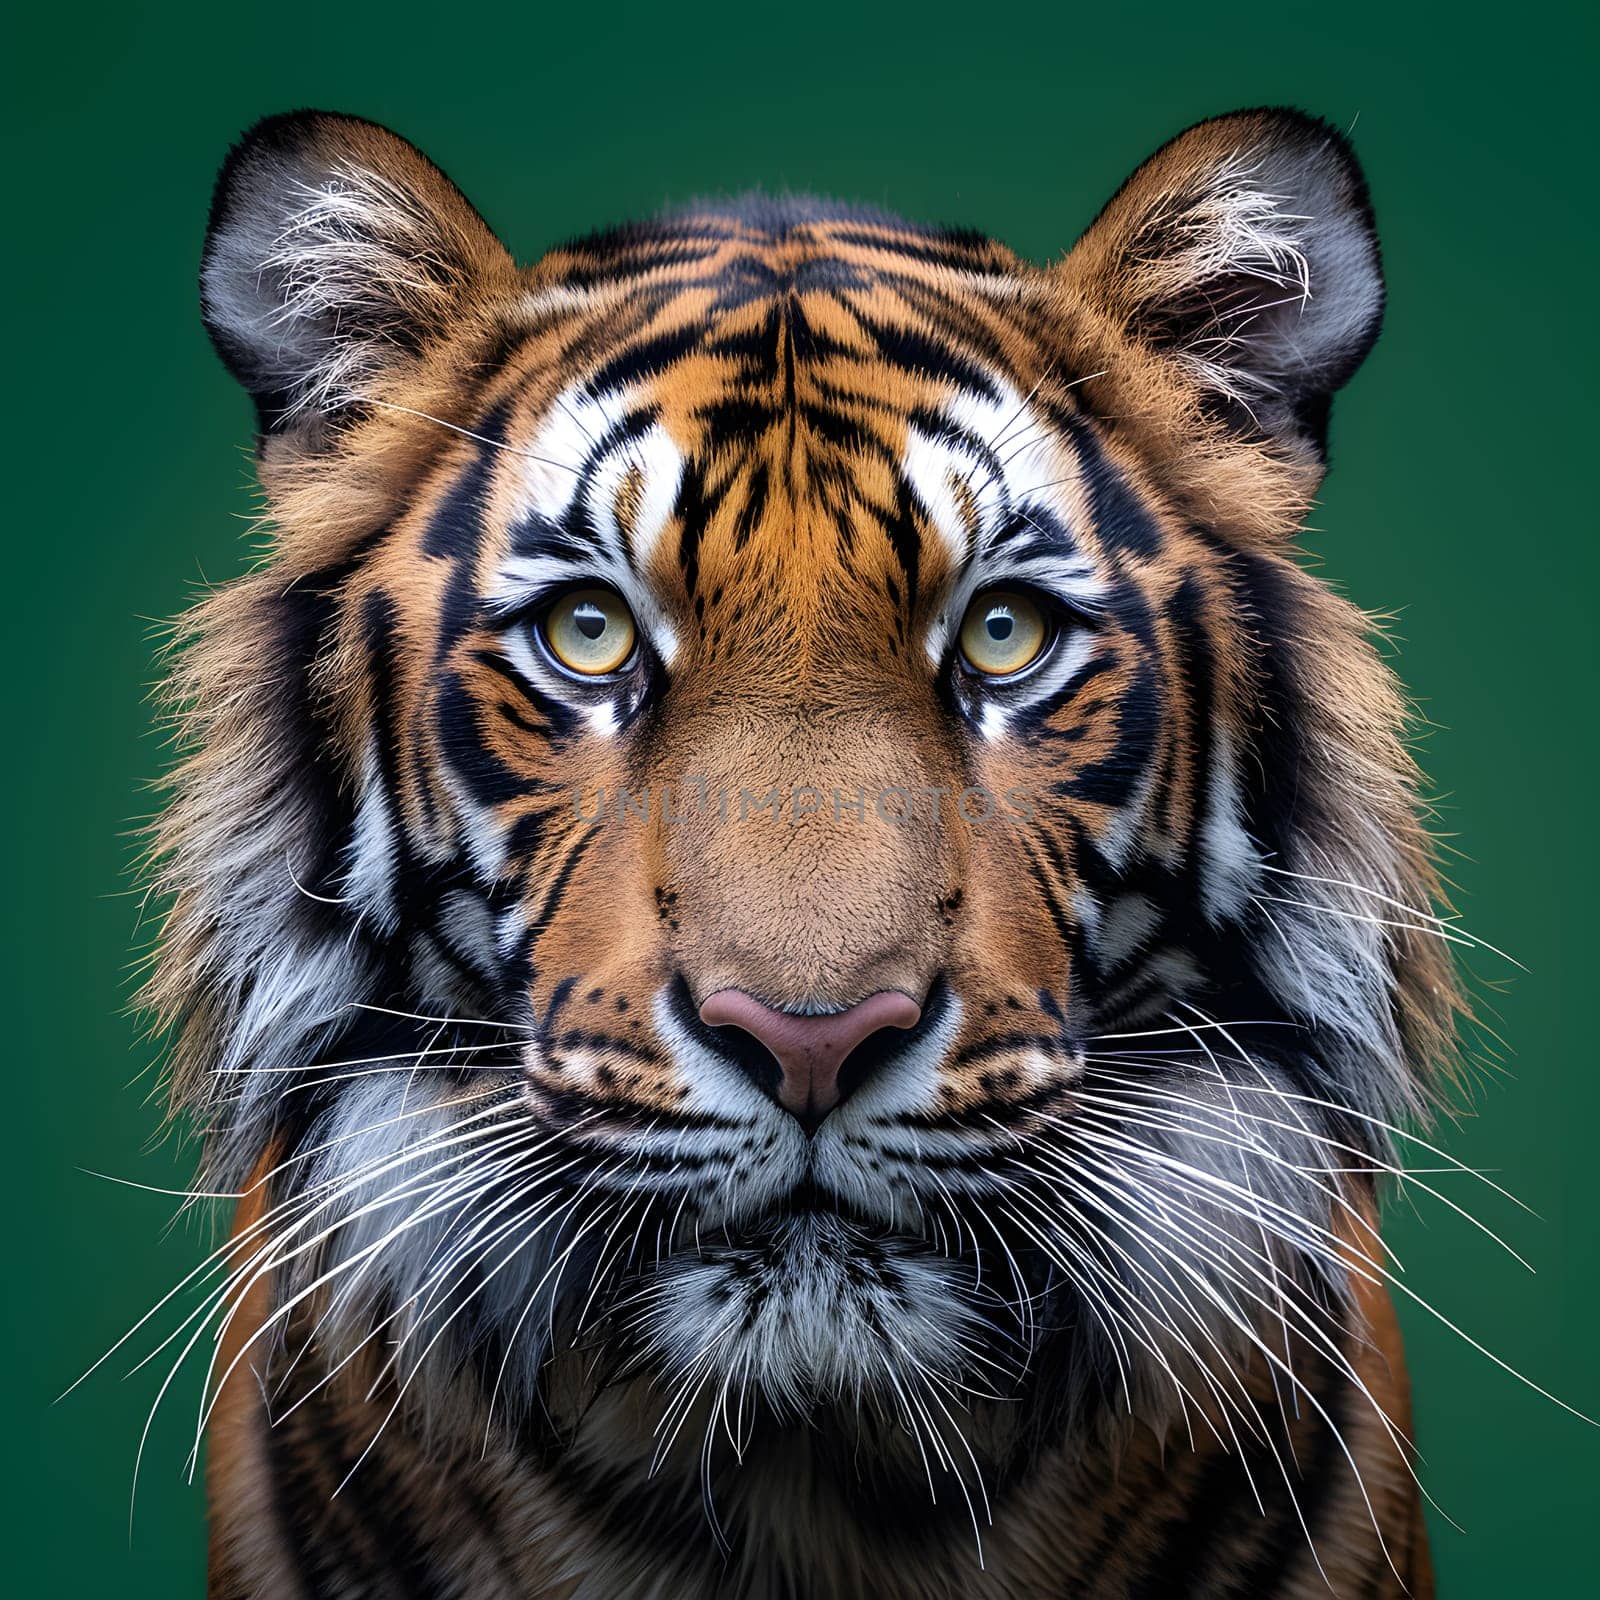 A closeup of a Siberian tigers face with distinctive whiskers against a lush green background. Tigers are carnivorous big cats in the Felidae family, known for their majestic appearance in nature